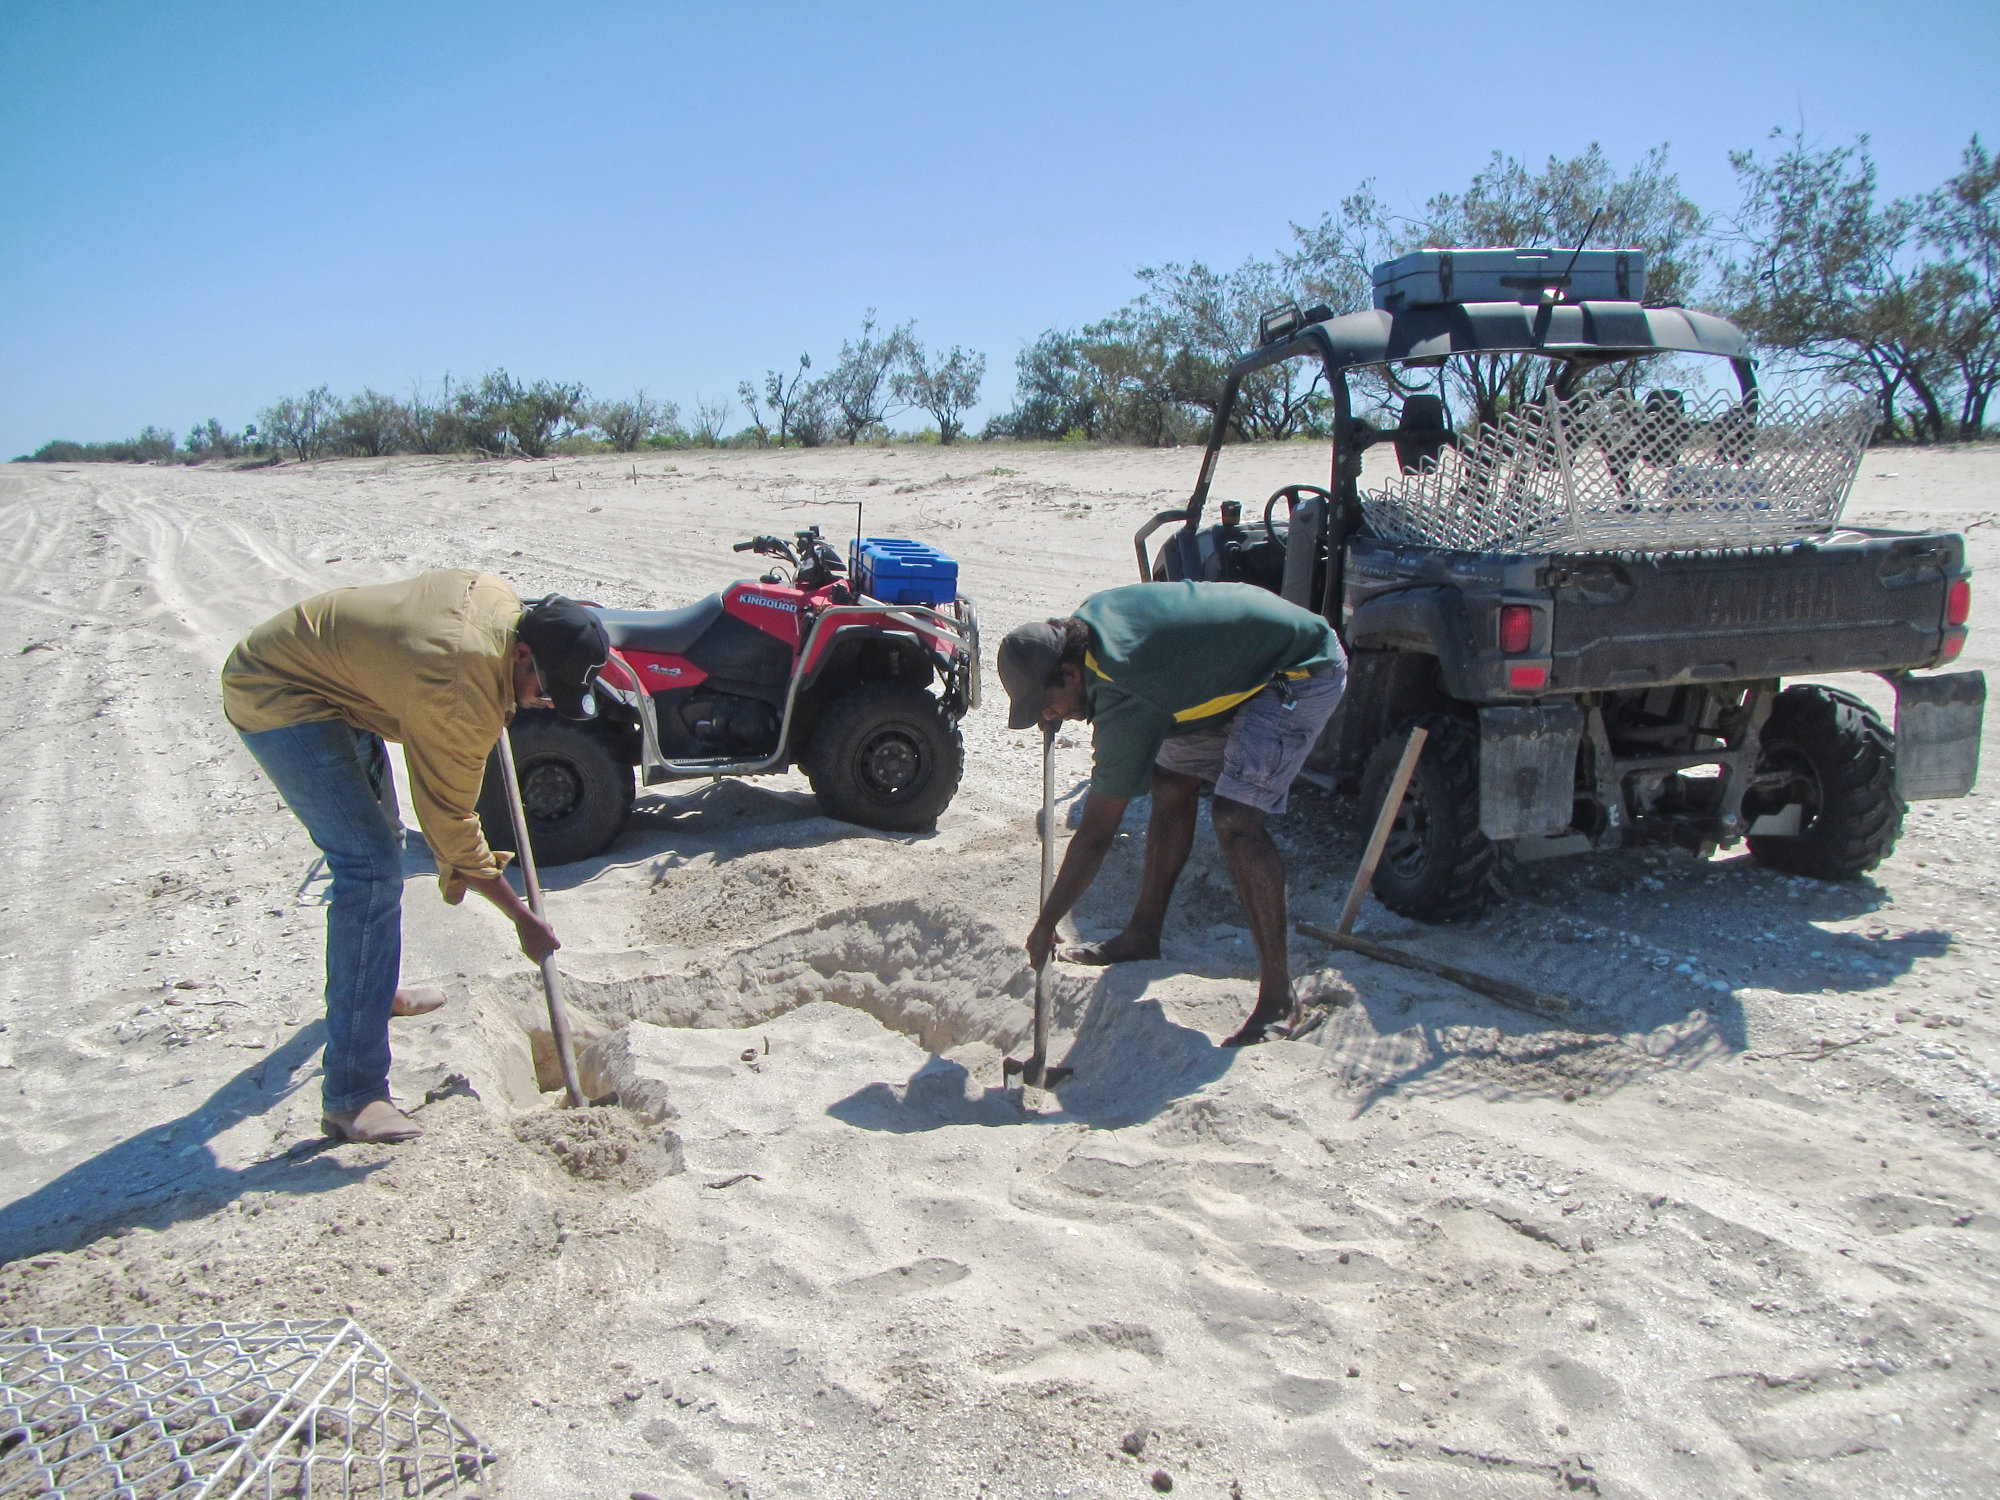 PORMPURAAW RANGERS INSTALLING A NEST PROTECTION CAGE ON AN OLIVE RIDLEY NEST